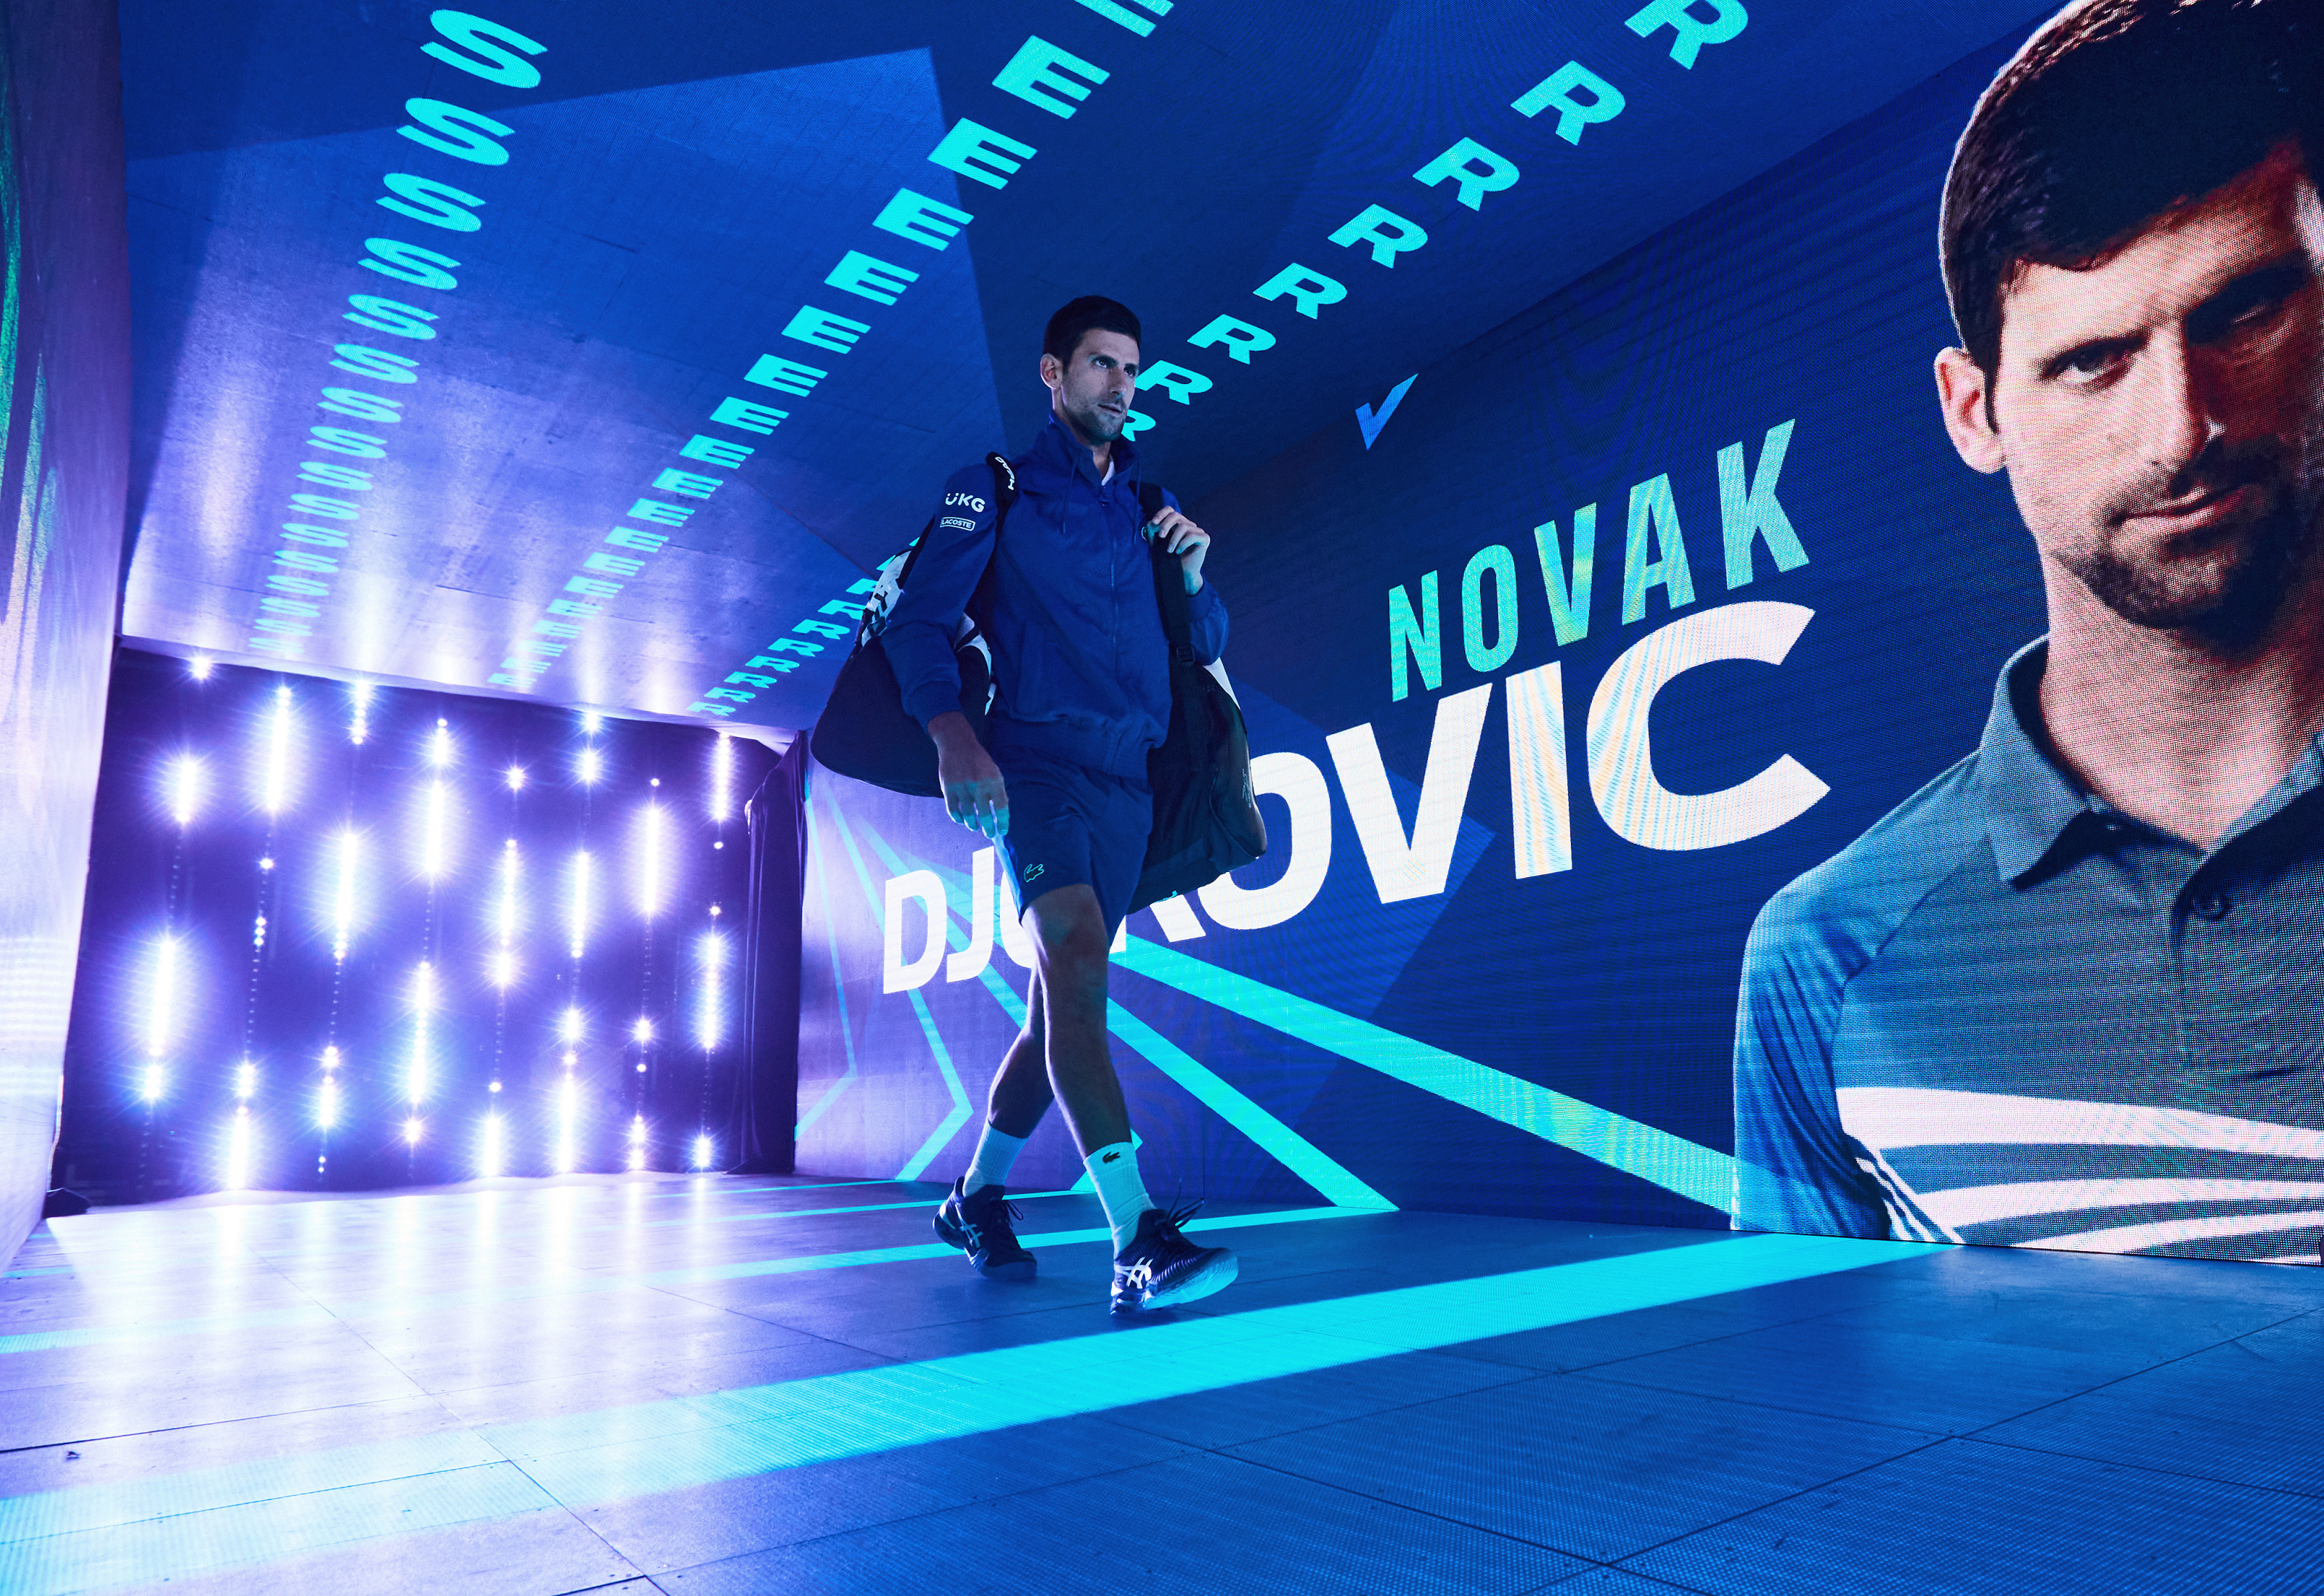 What are the chances of Djokovic winning the Nitto ATP Finals?